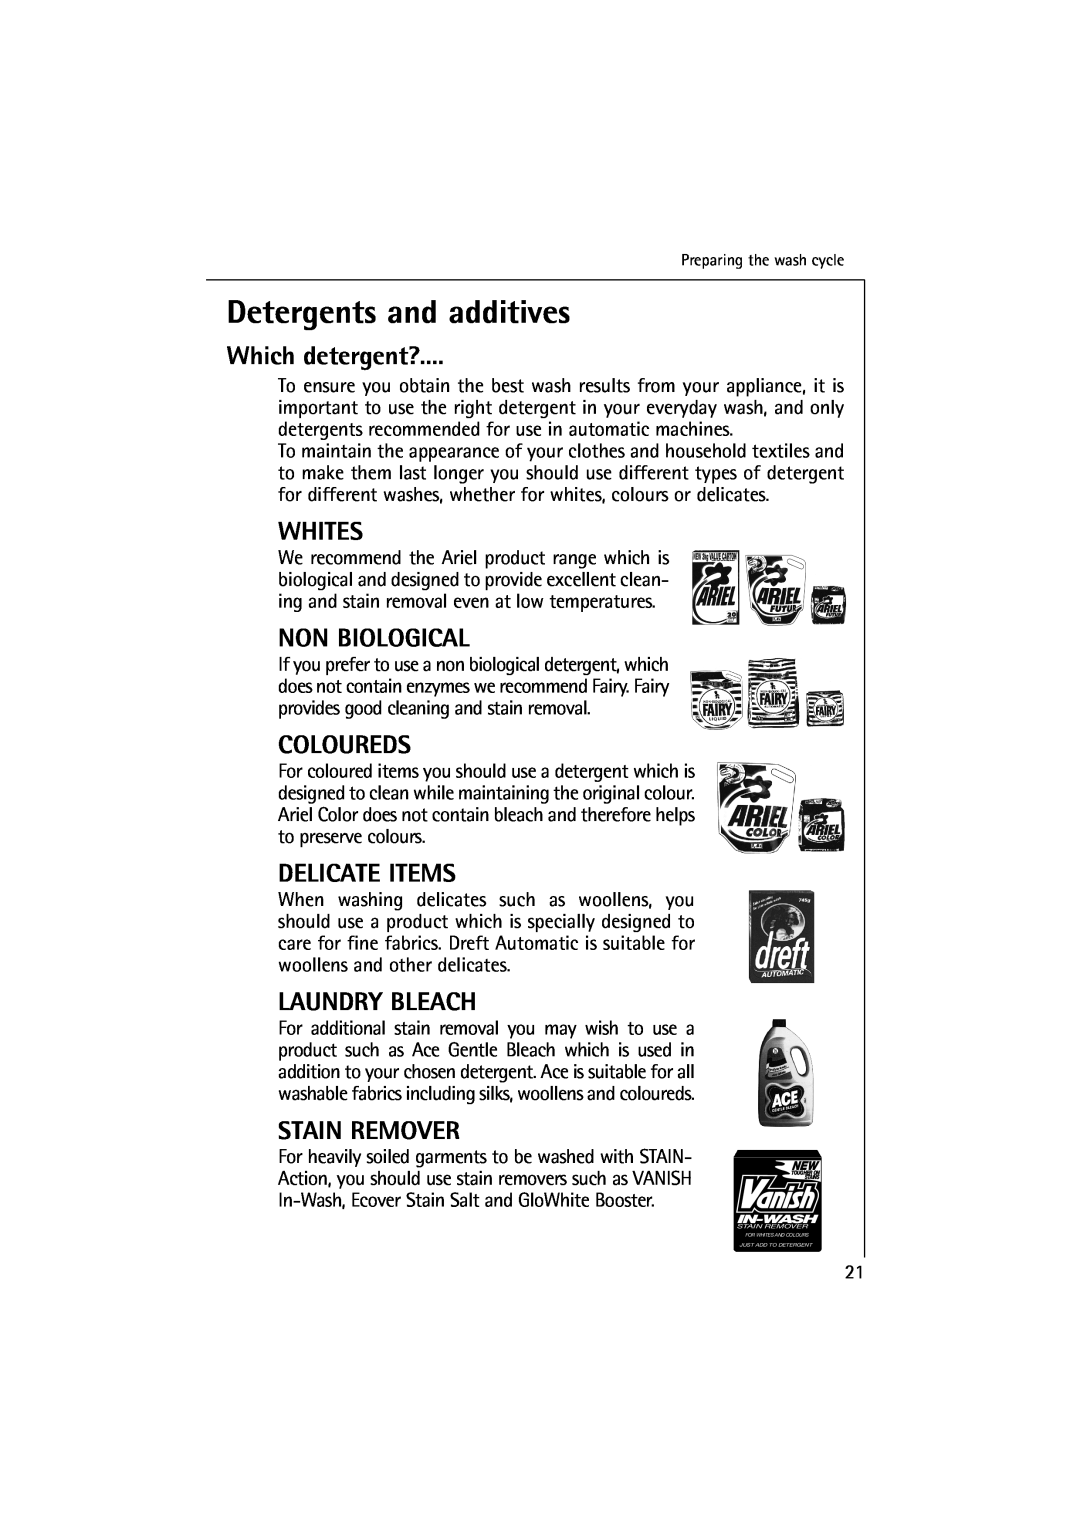 Electrolux 10500 VI manual Detergents and additives, Which detergent?, Whites, Non Biological, Coloureds, Delicate Items 